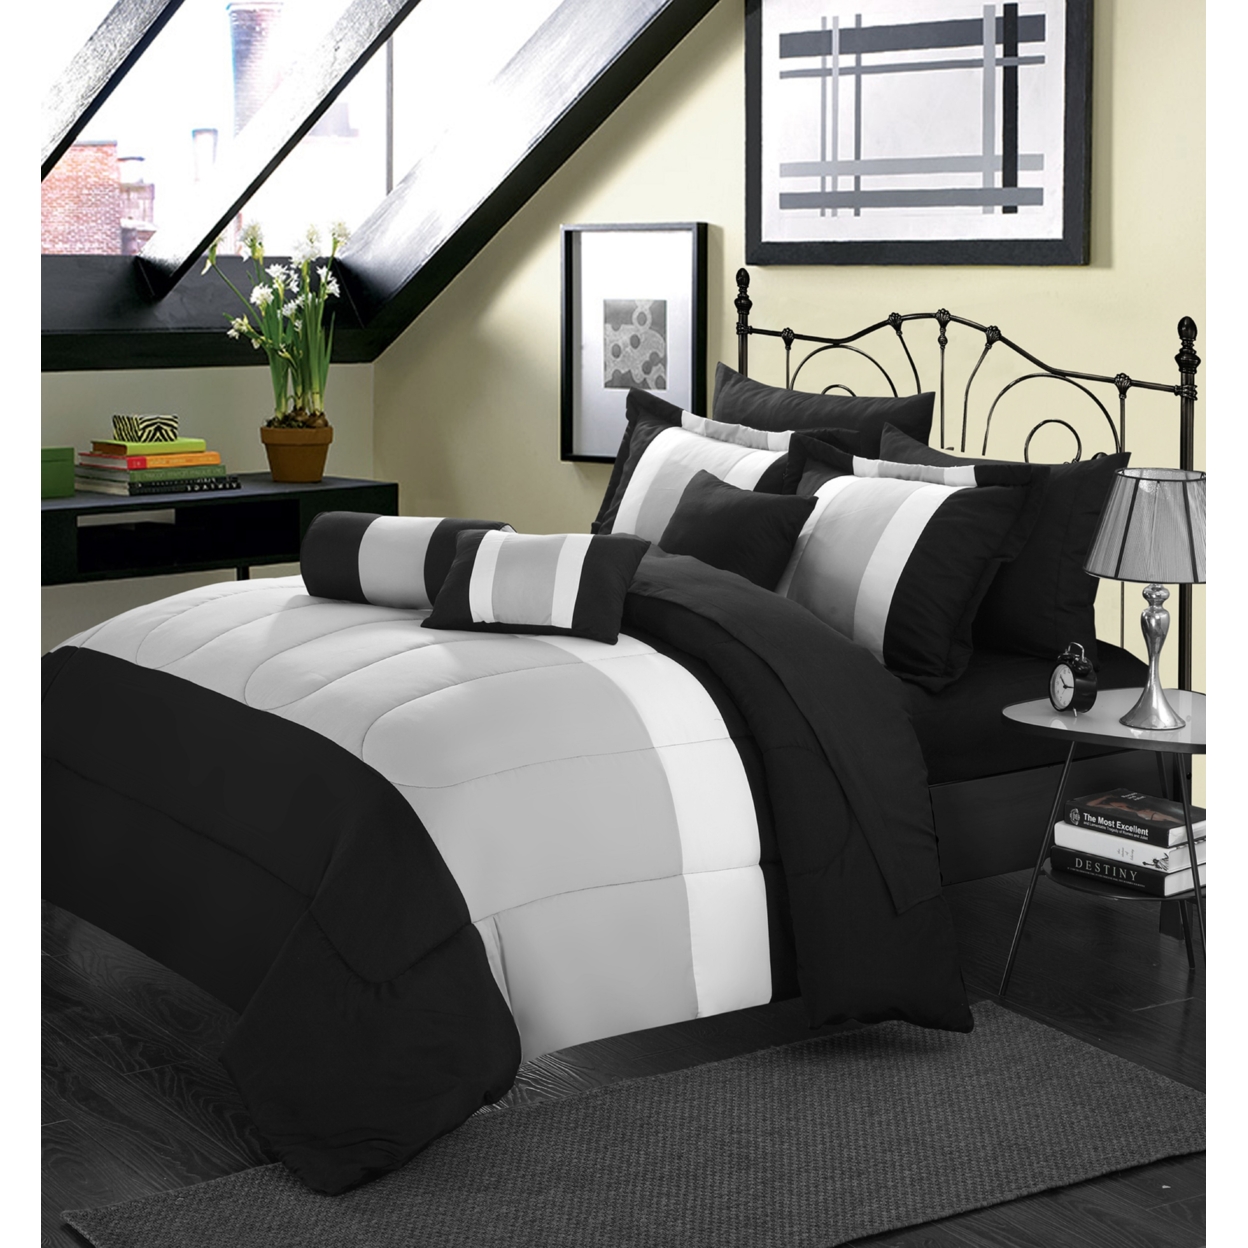 Sebastian 10-Piece Complete Bed In A Bag Bedding With Bed Sheet Set, Comforter Set, And Decorative Pillows - Black, Queen